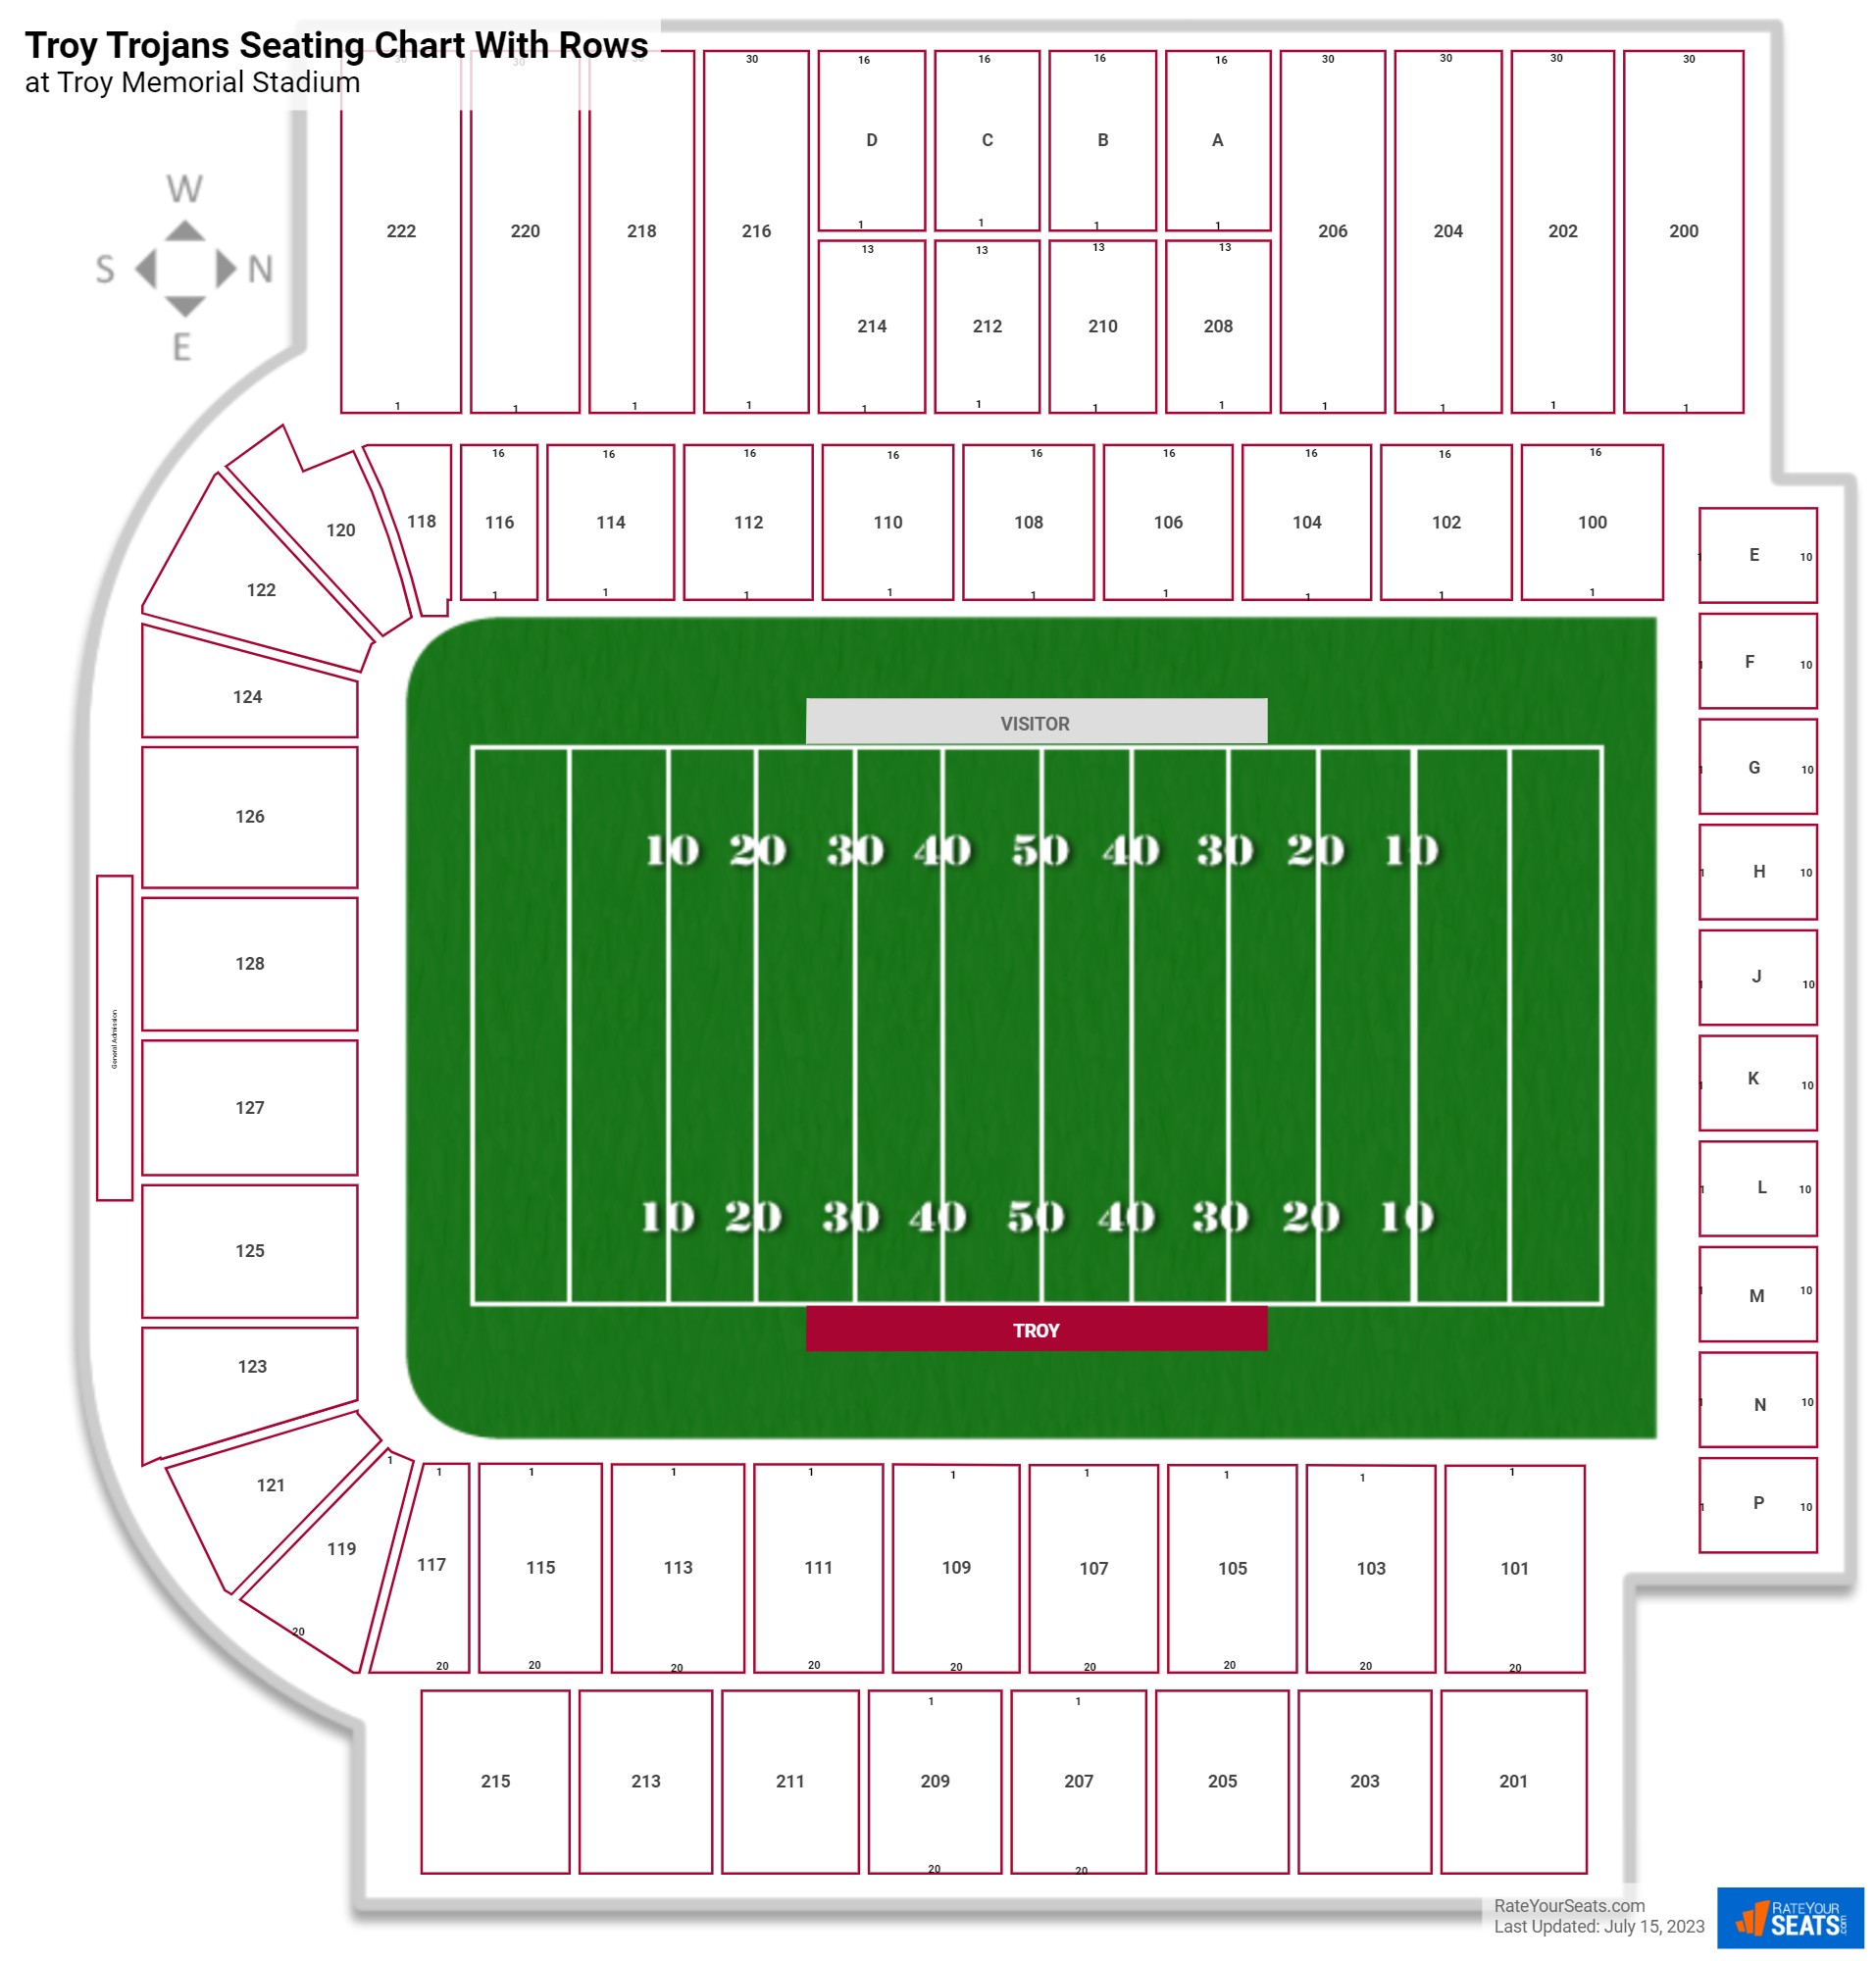 Troy Memorial Stadium seating chart with row numbers